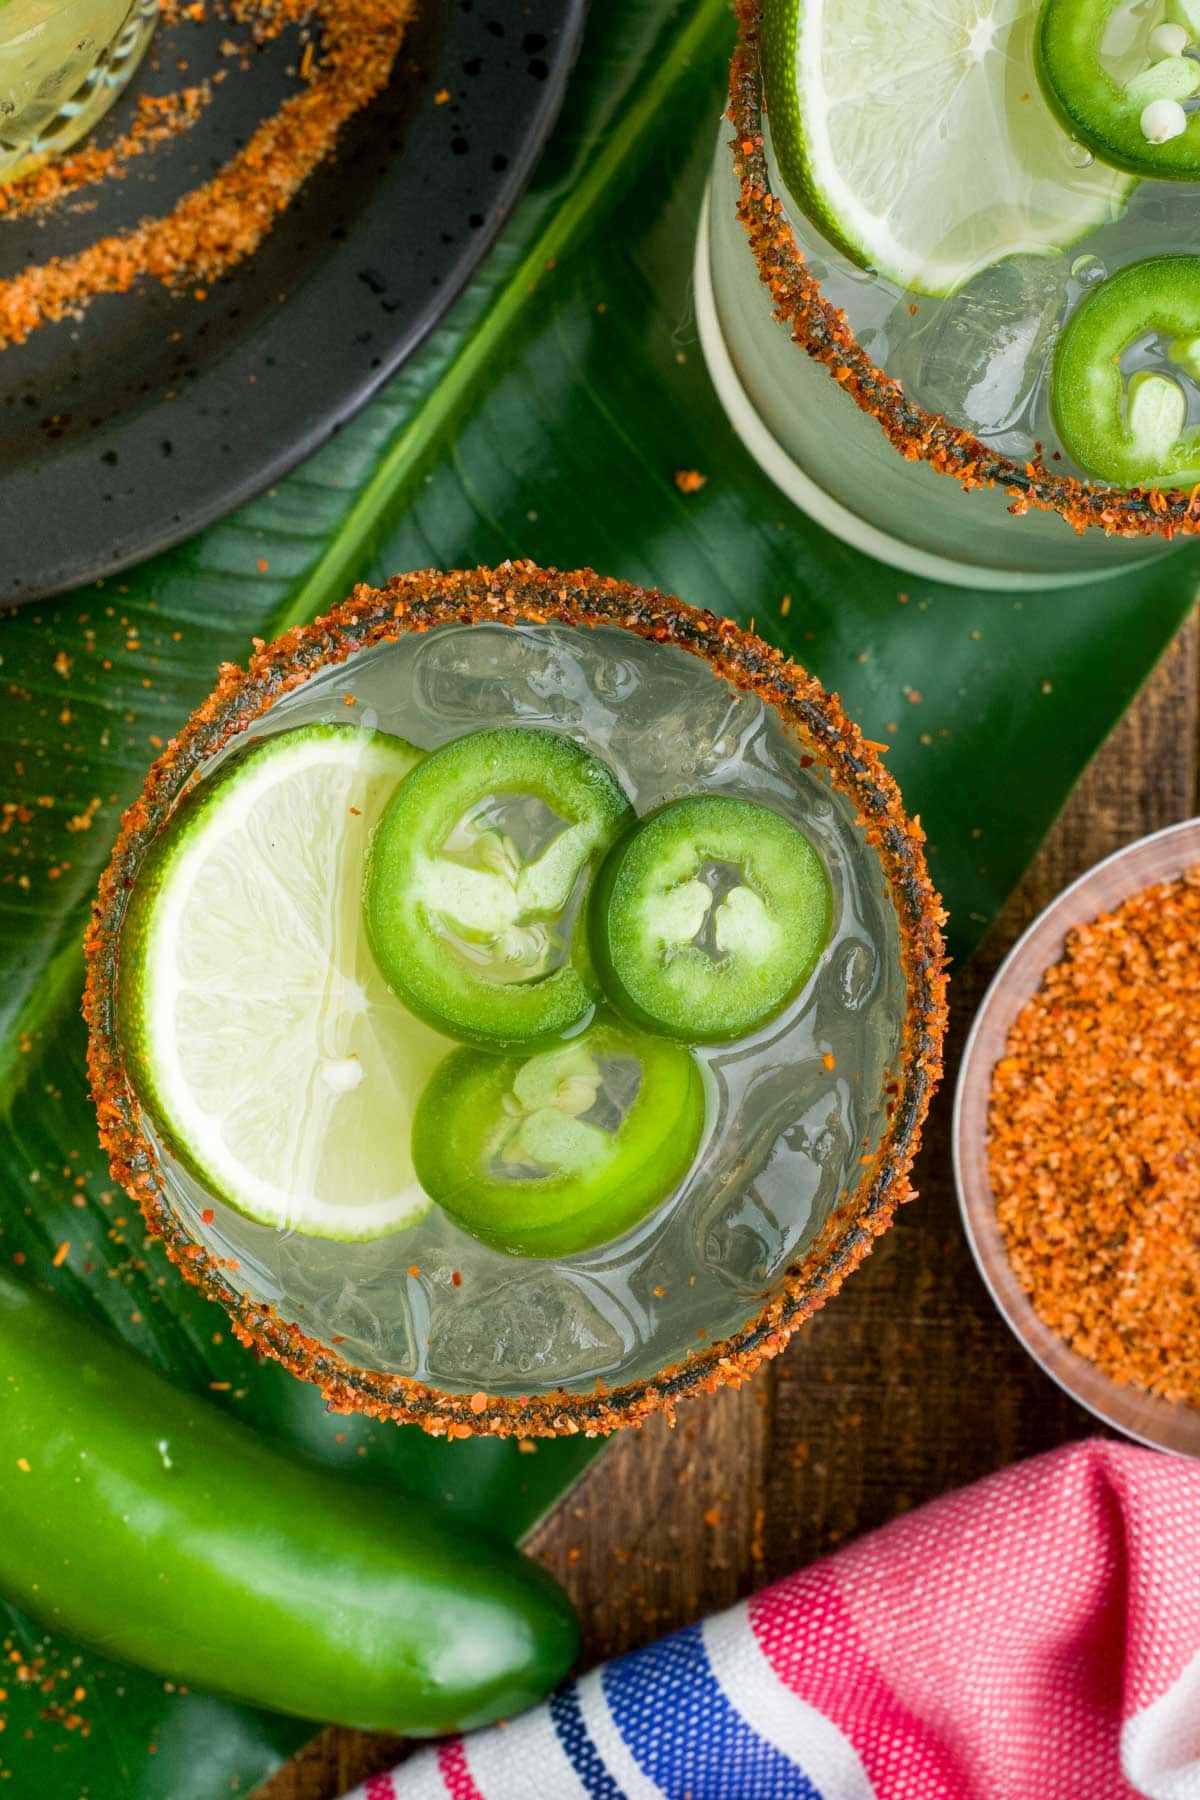 Overhead view of margaritas in glasses with slices of jalapeno and lime.